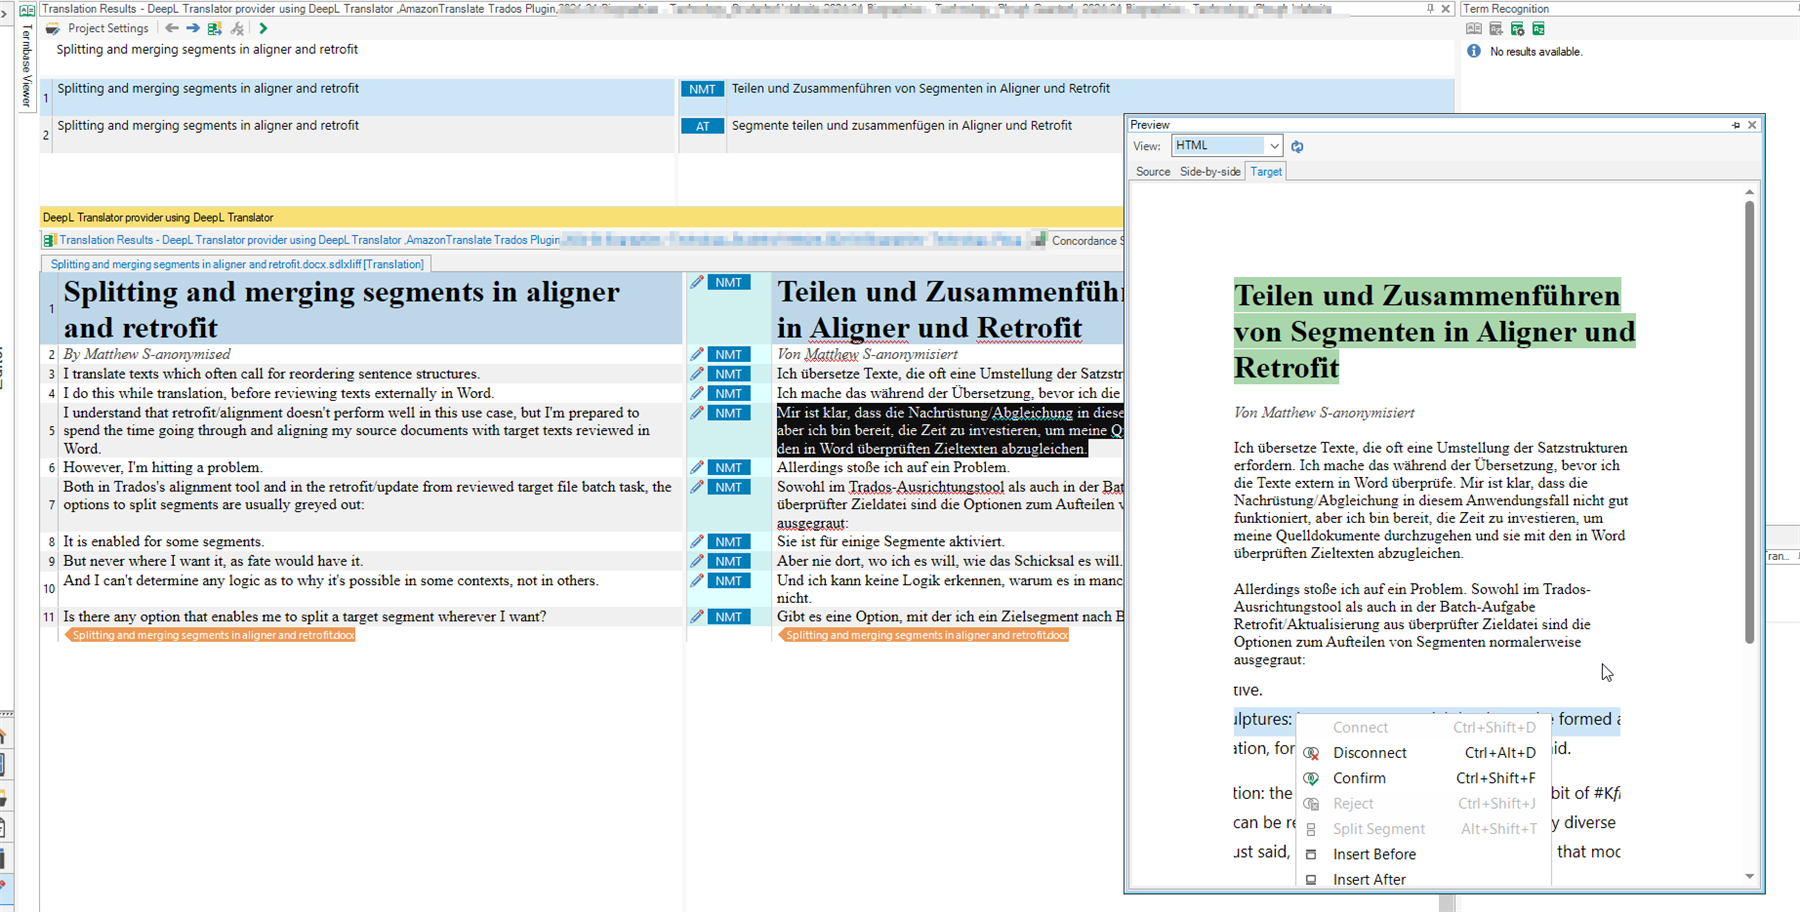 Screenshot of Trados Studio with a focus on the translation results pane, displaying a forum post about splitting and merging segments in aligner and retrofit, alongside a preview pane showing the same text in German.